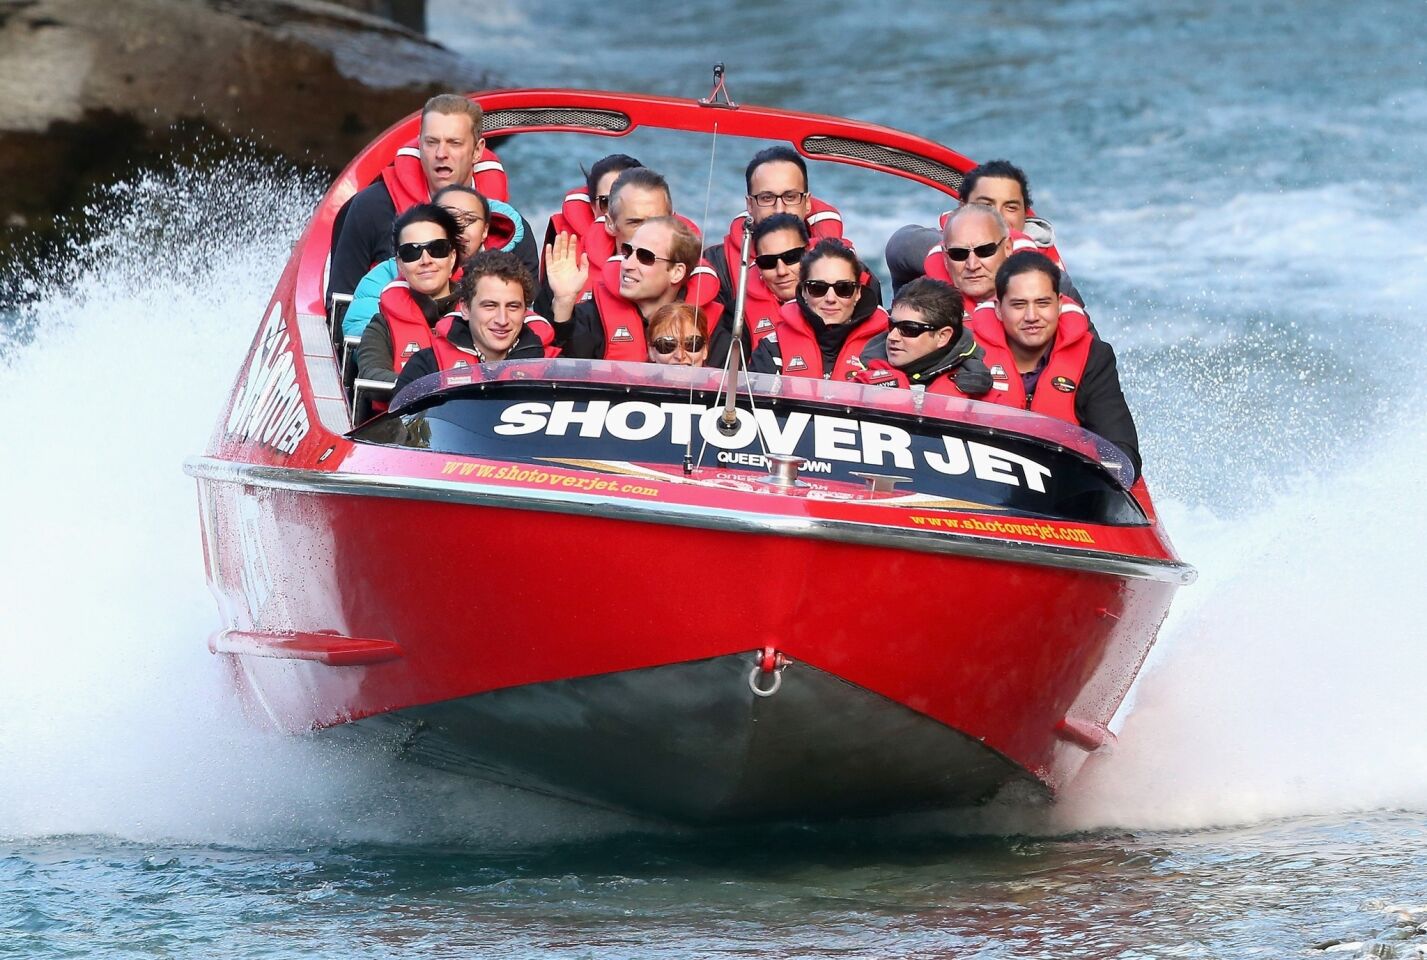 The duke and duchess travel on the Shotover Jet on the Shotover River in Queenstown, New Zealand.